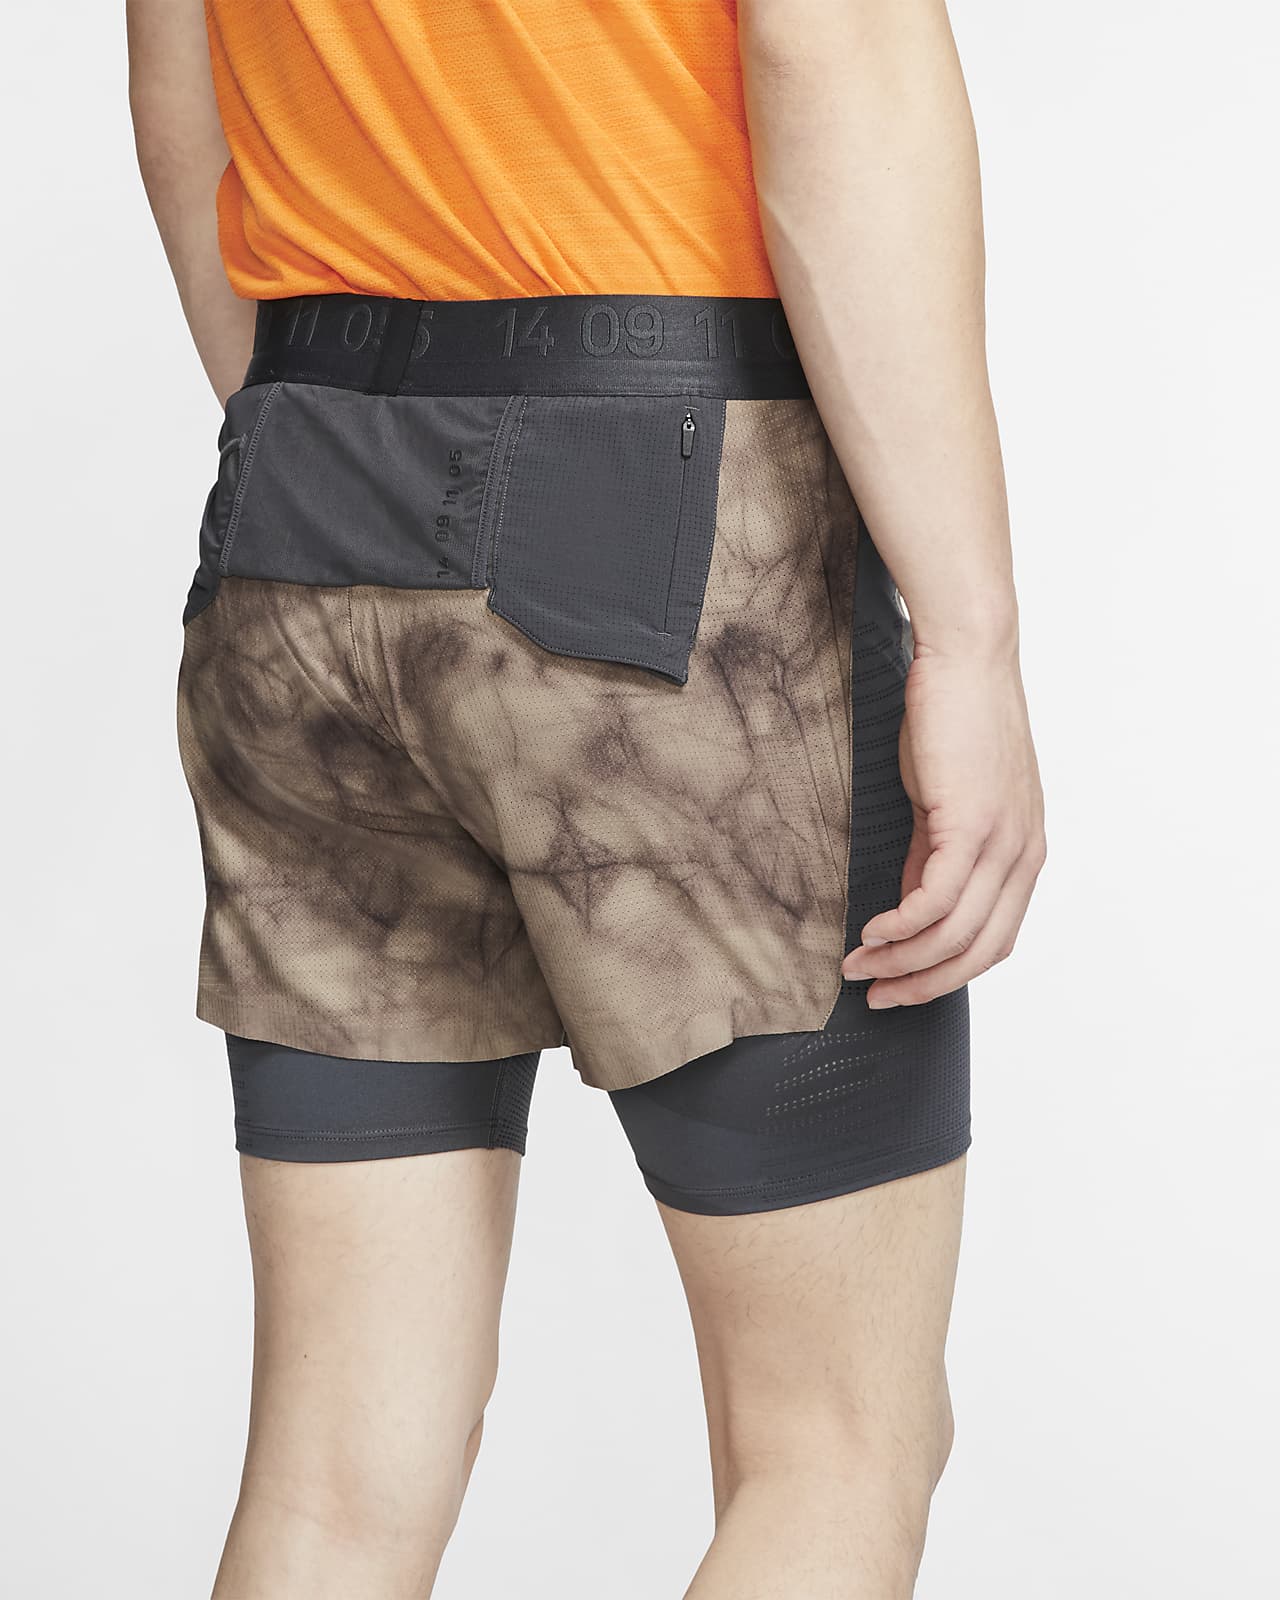 nike two in one running shorts